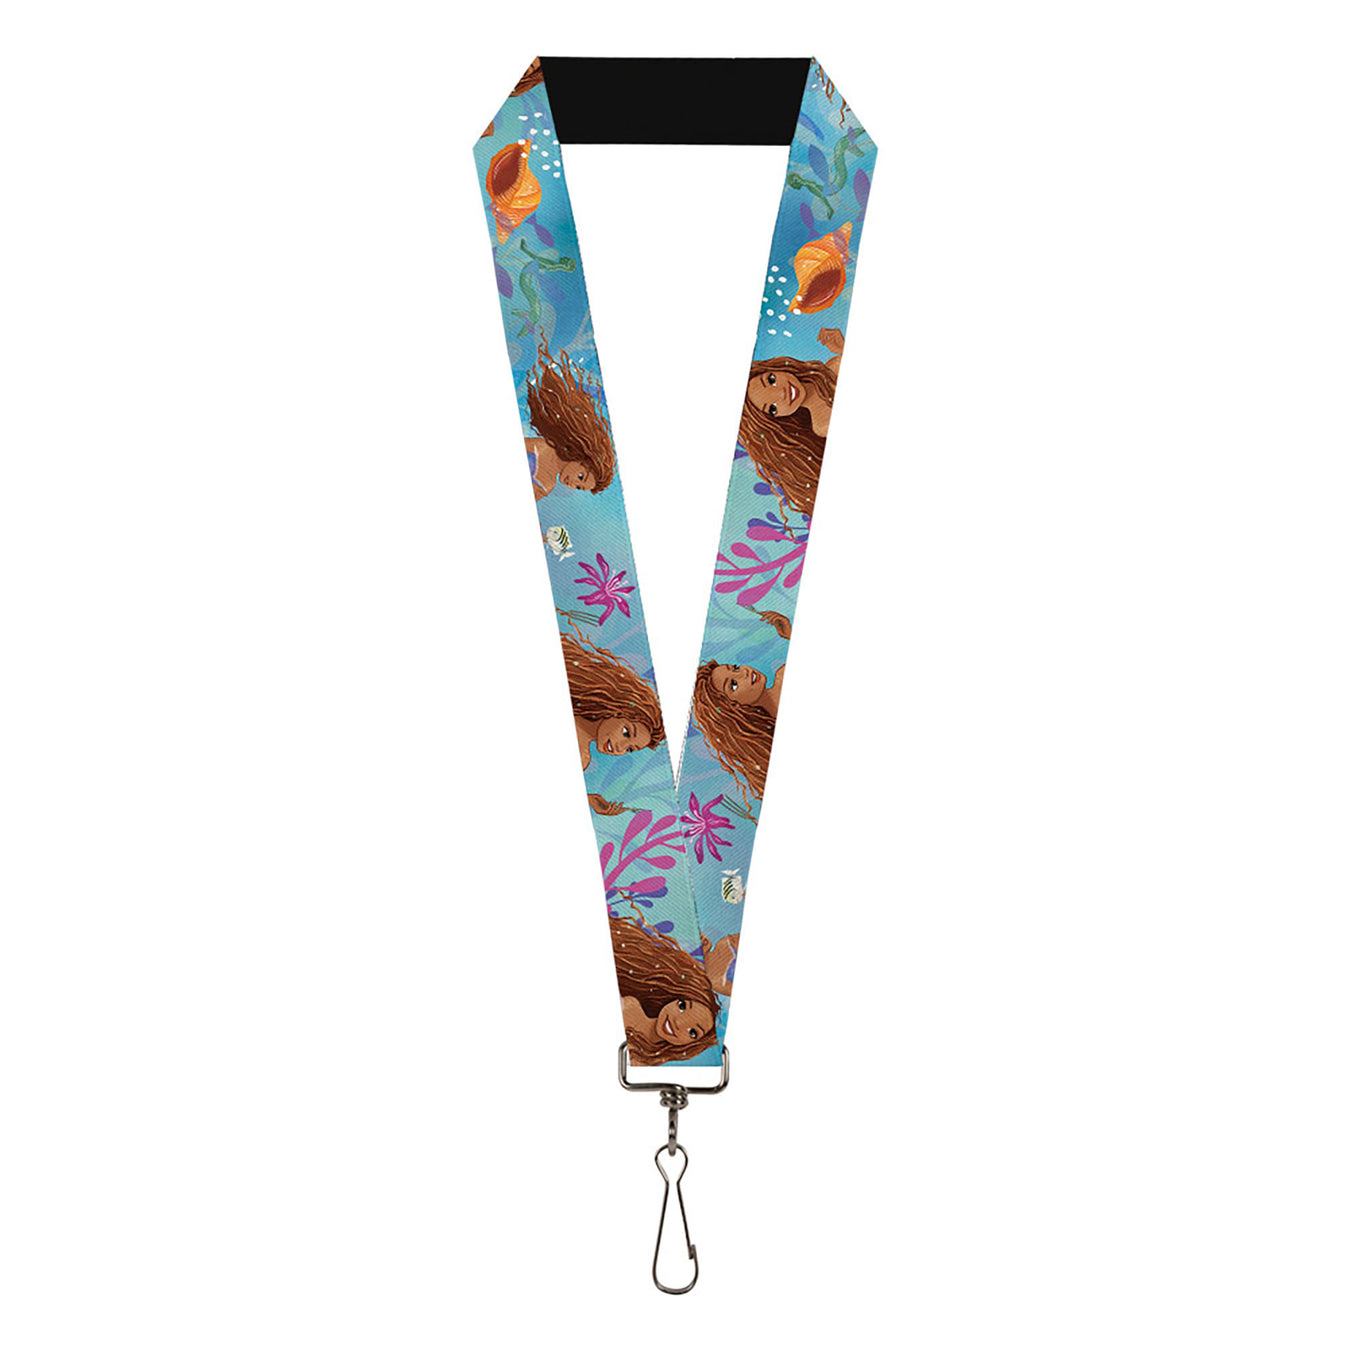 Buckle Clip - Lanyards Supplier Malaysia